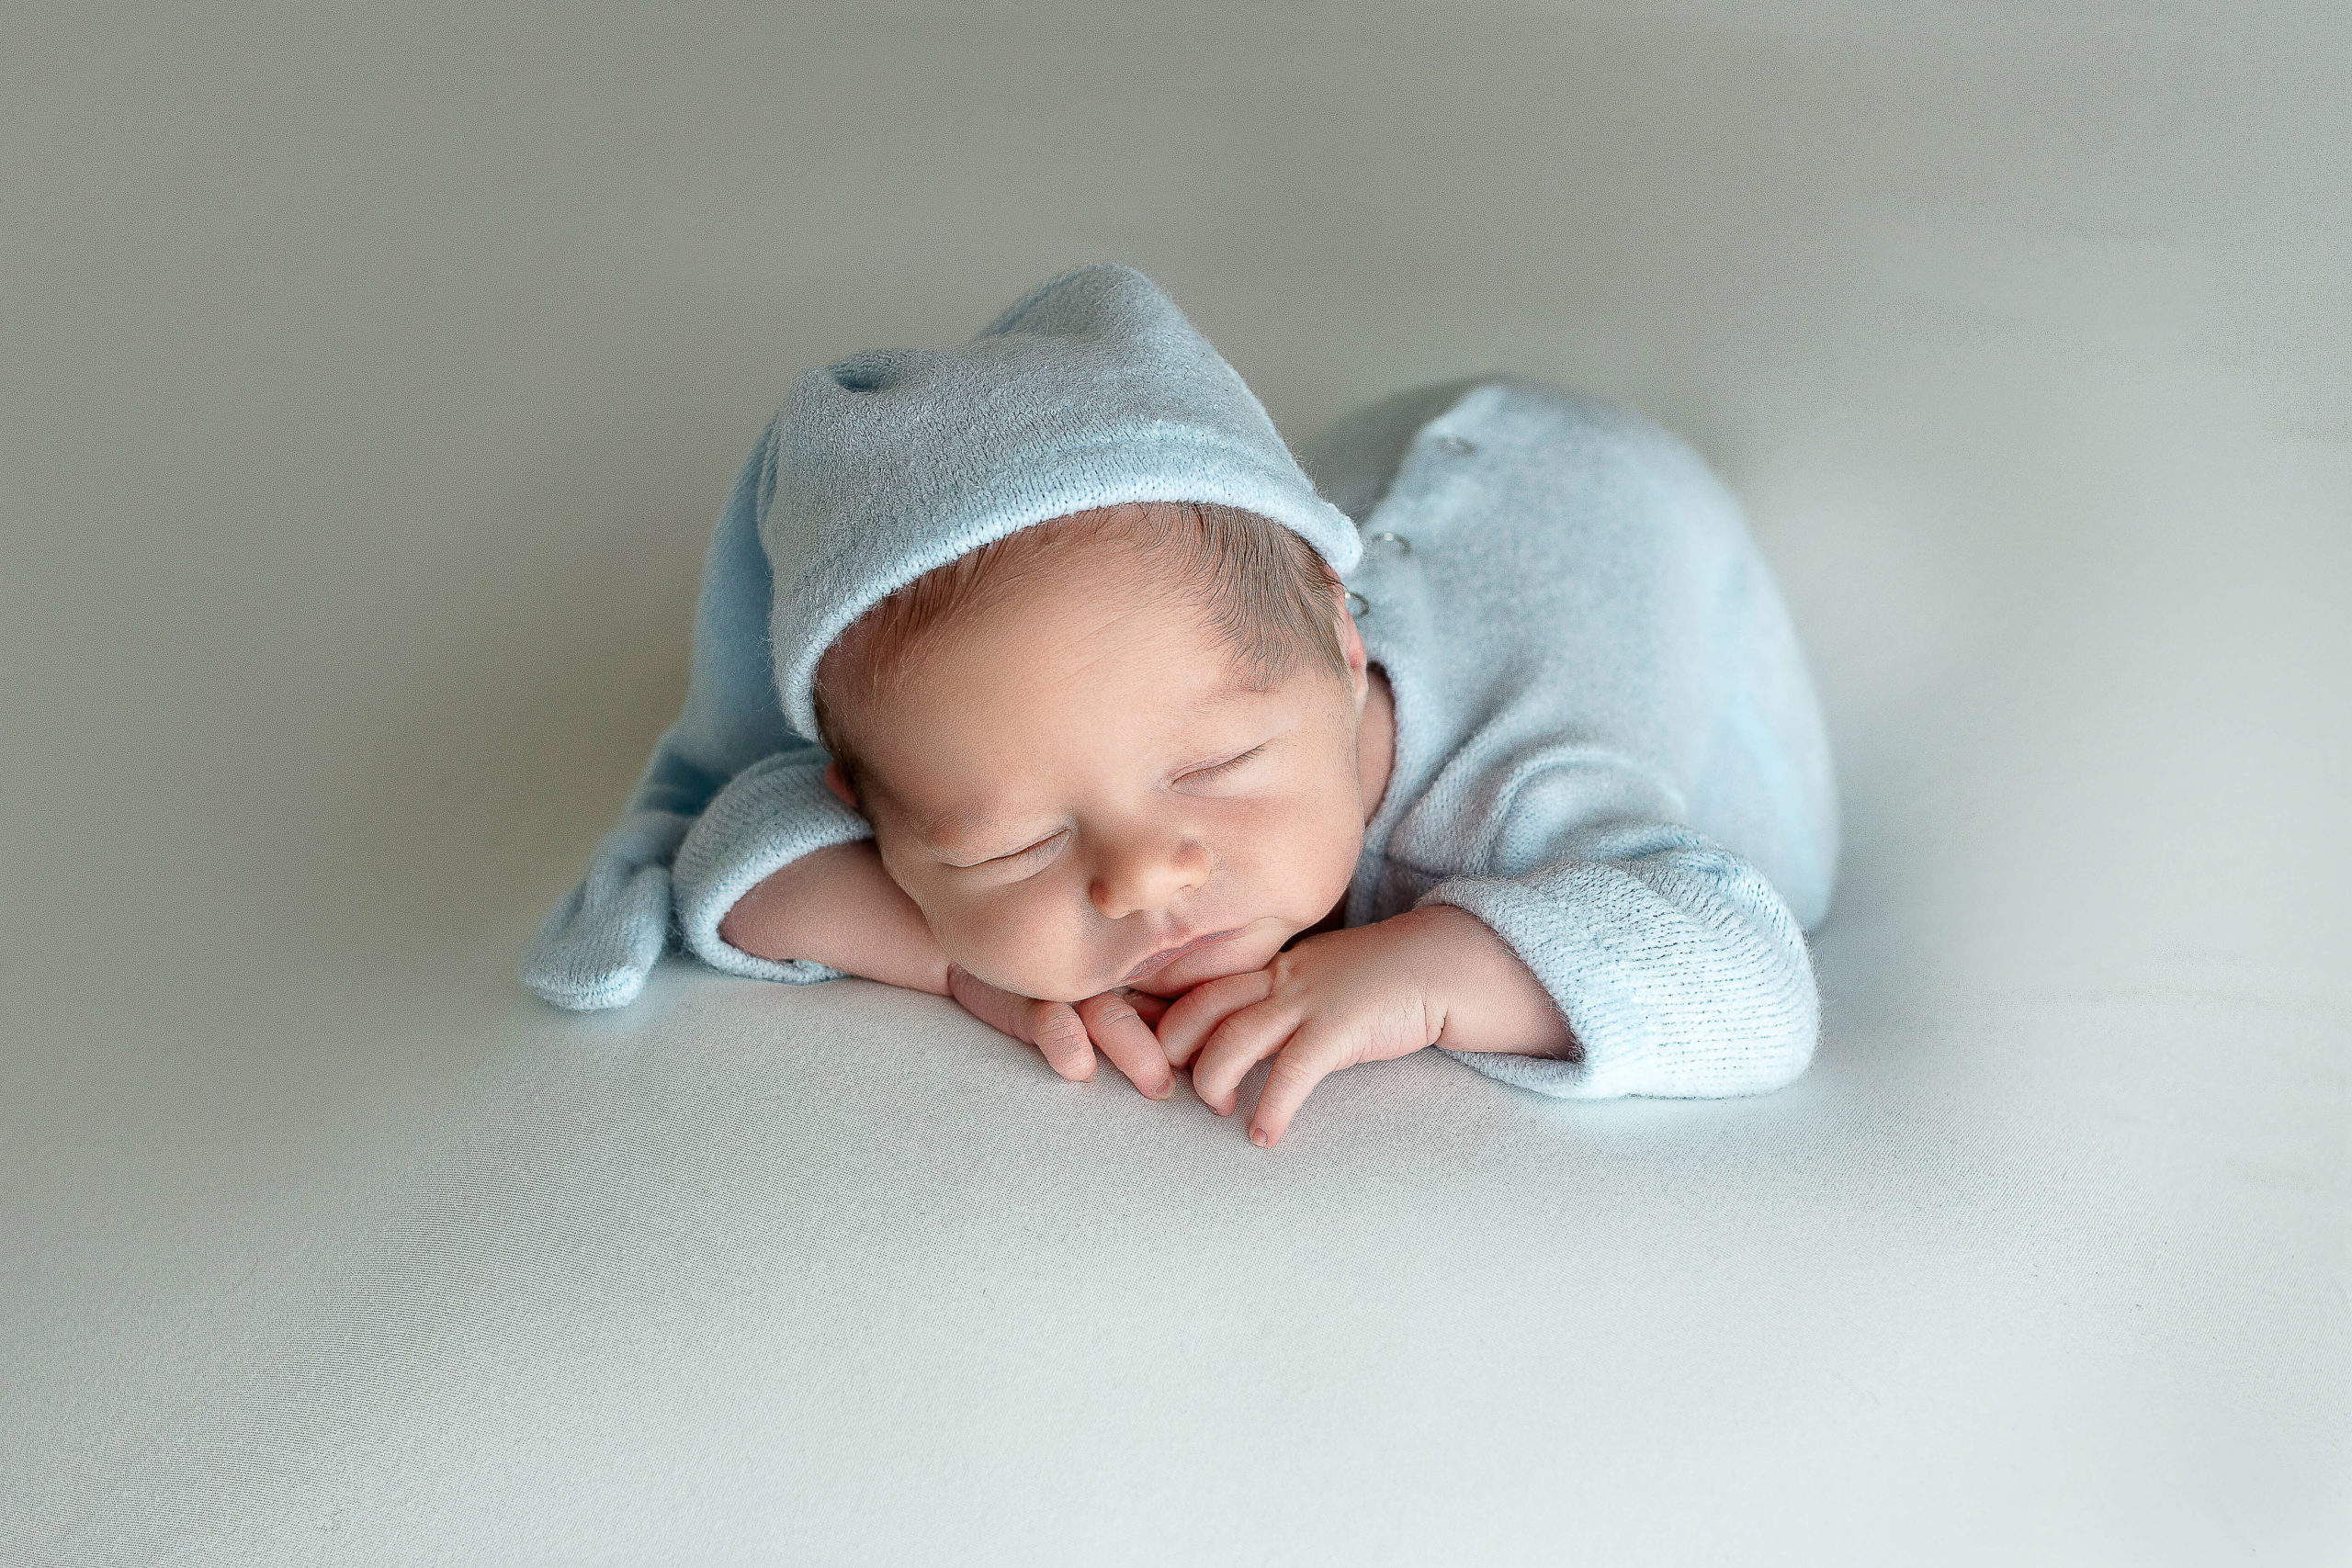 newborn baby boy laying on his belly wearing a blue outfit